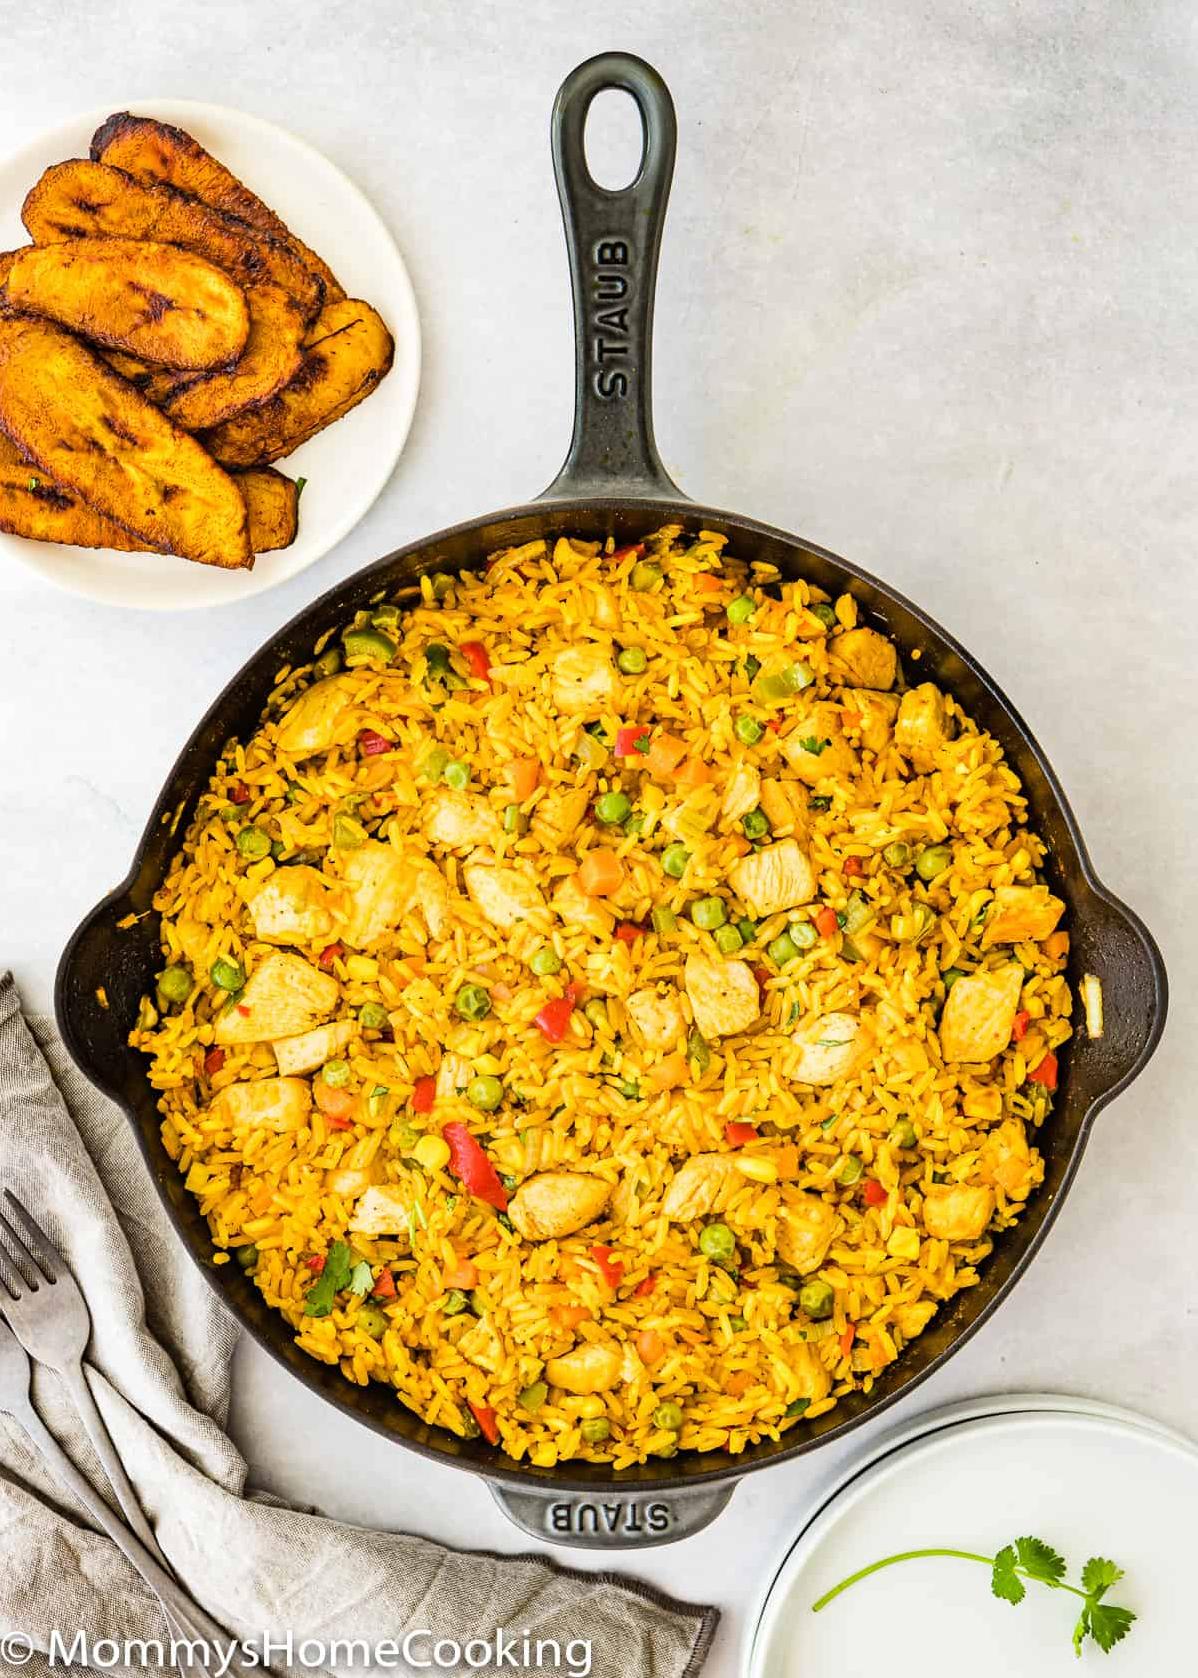  Arroz Con Pollo with a healthy twist: perfect weekday dinner